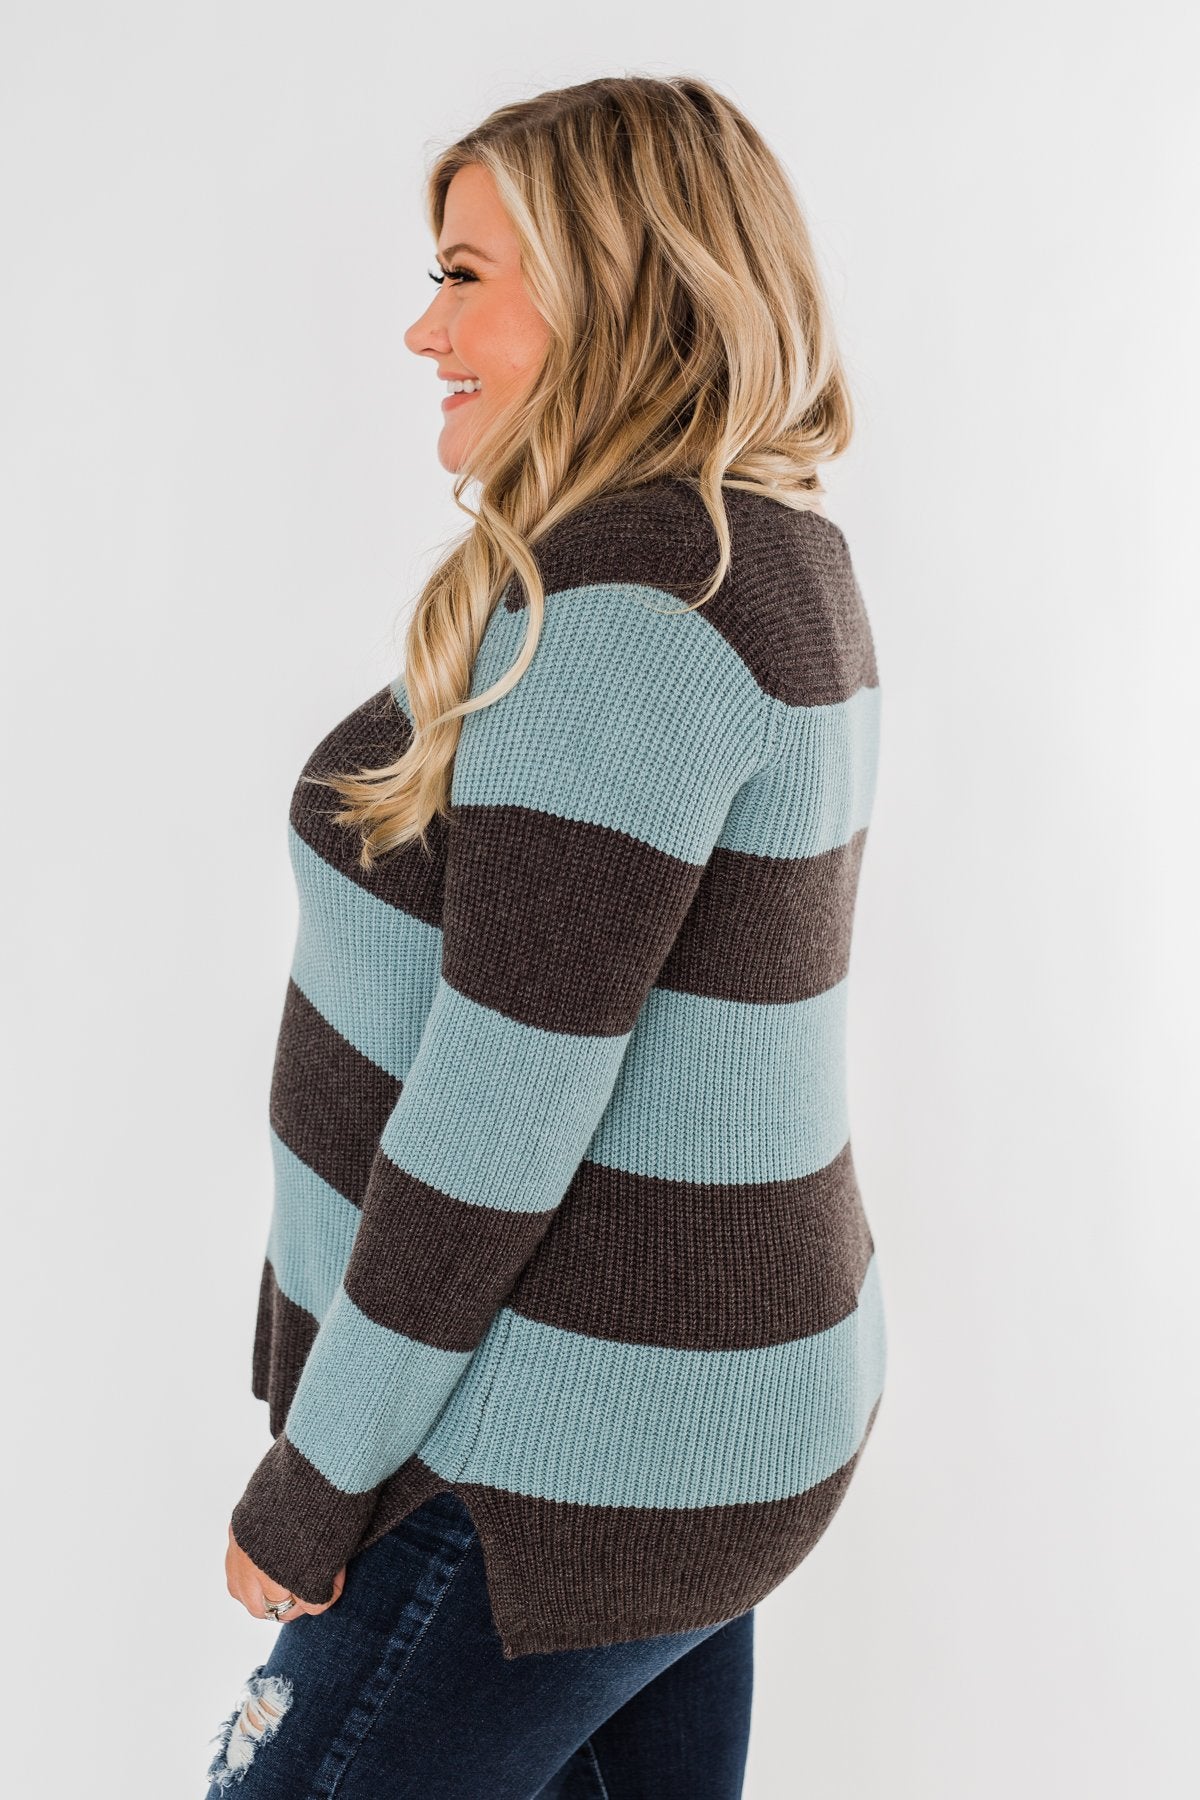 Striped Knit Sweater- Blue & Charcoal